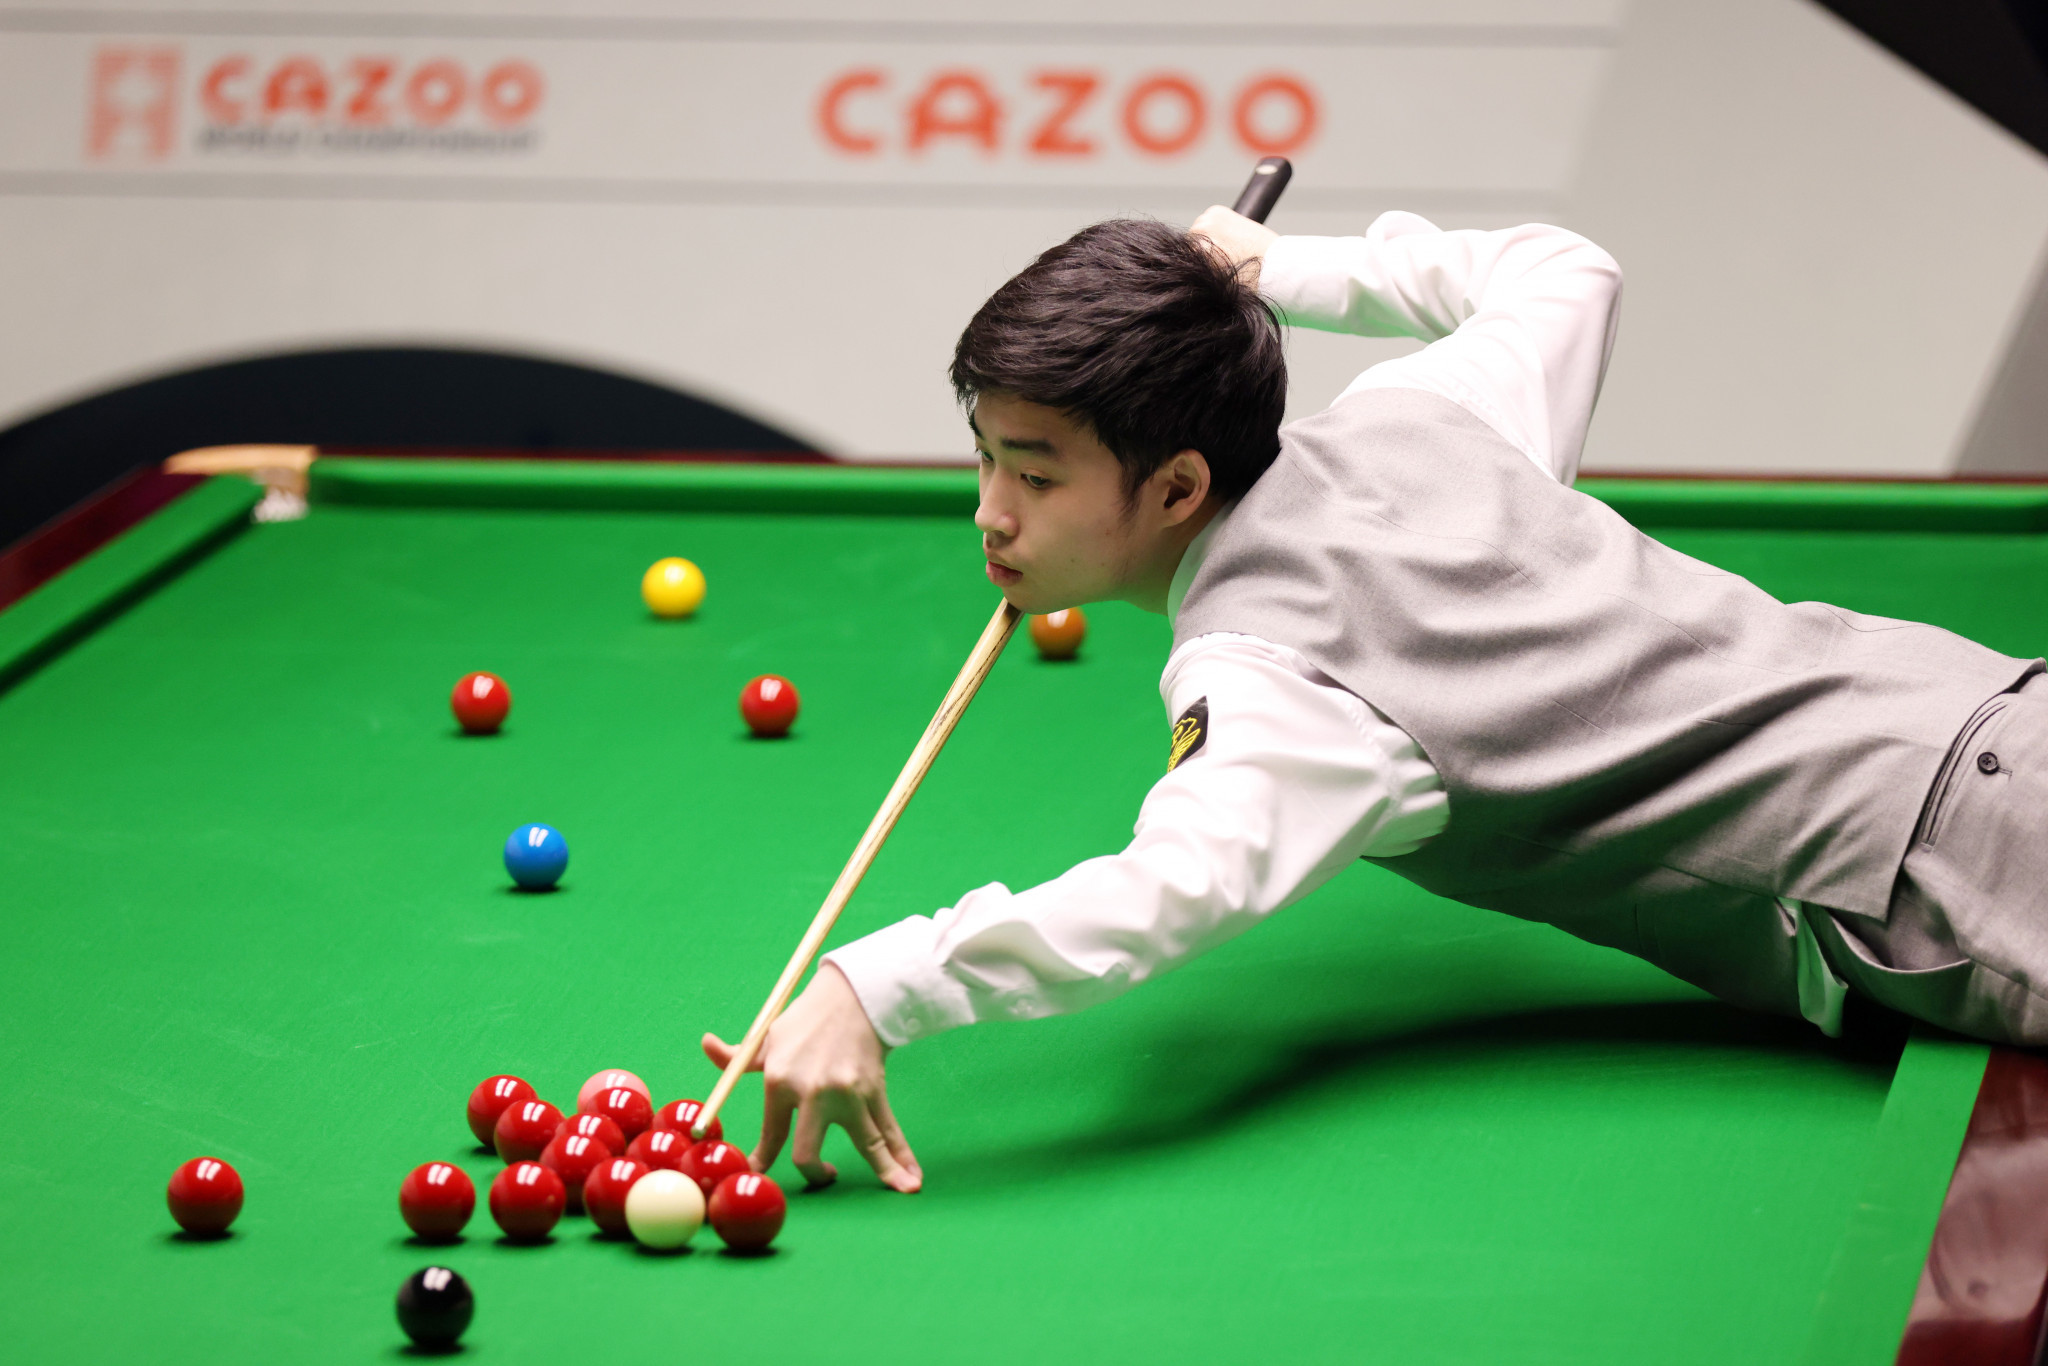 China's Si Jiahui became the youngest World Championship semi-finalist for 27 years after defeating Anthony McGill in a deciding frame at the Crucible Theatre ©Getty Images